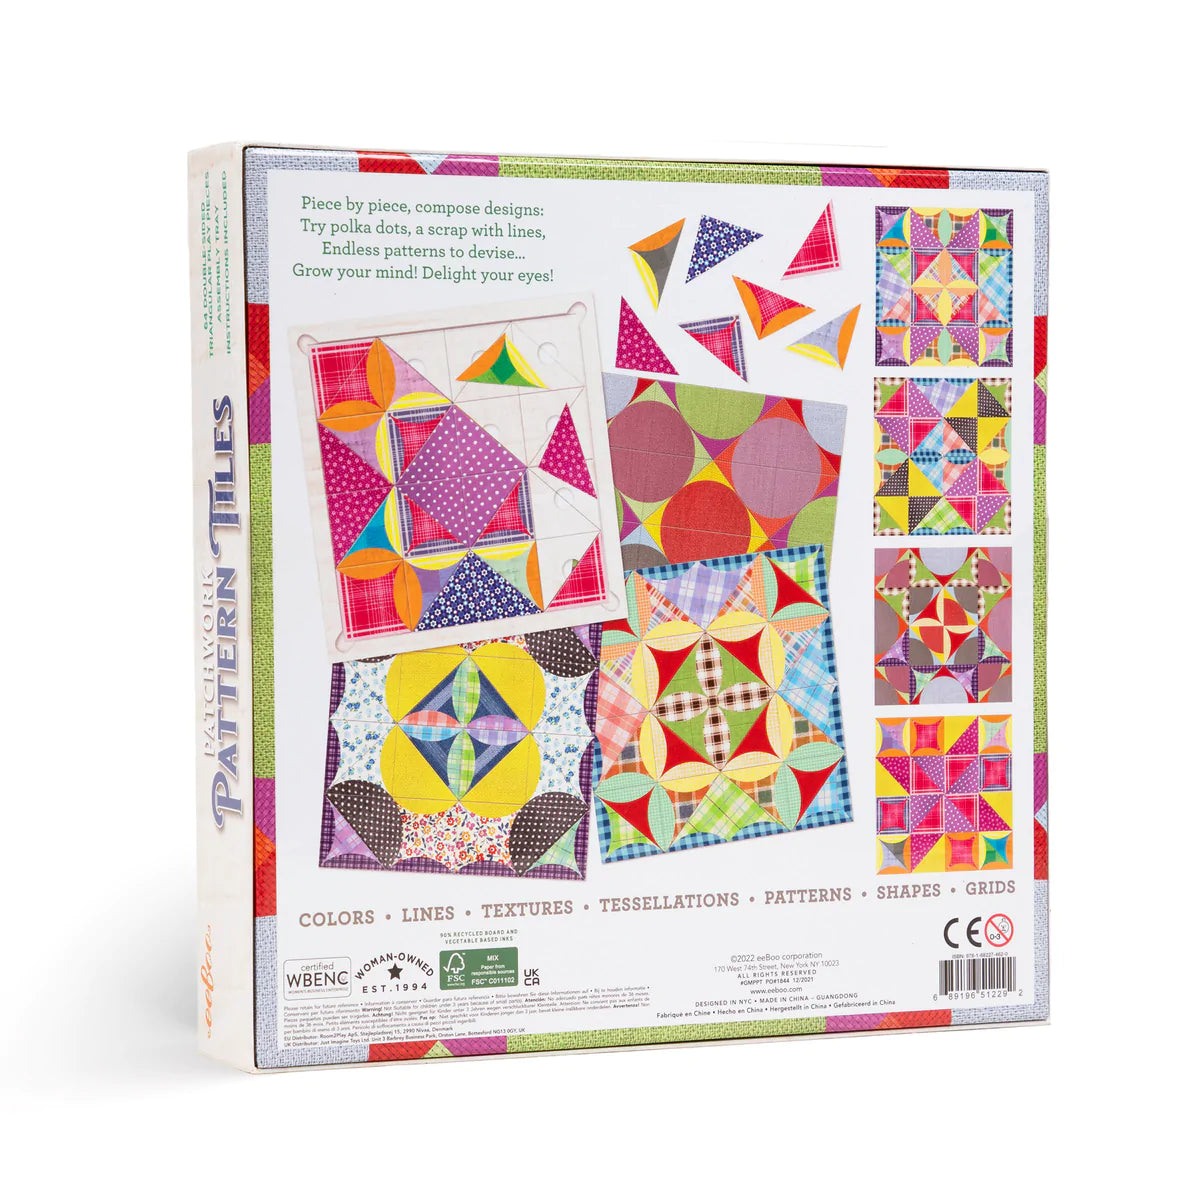 Patchwork Pattern Tiles Game